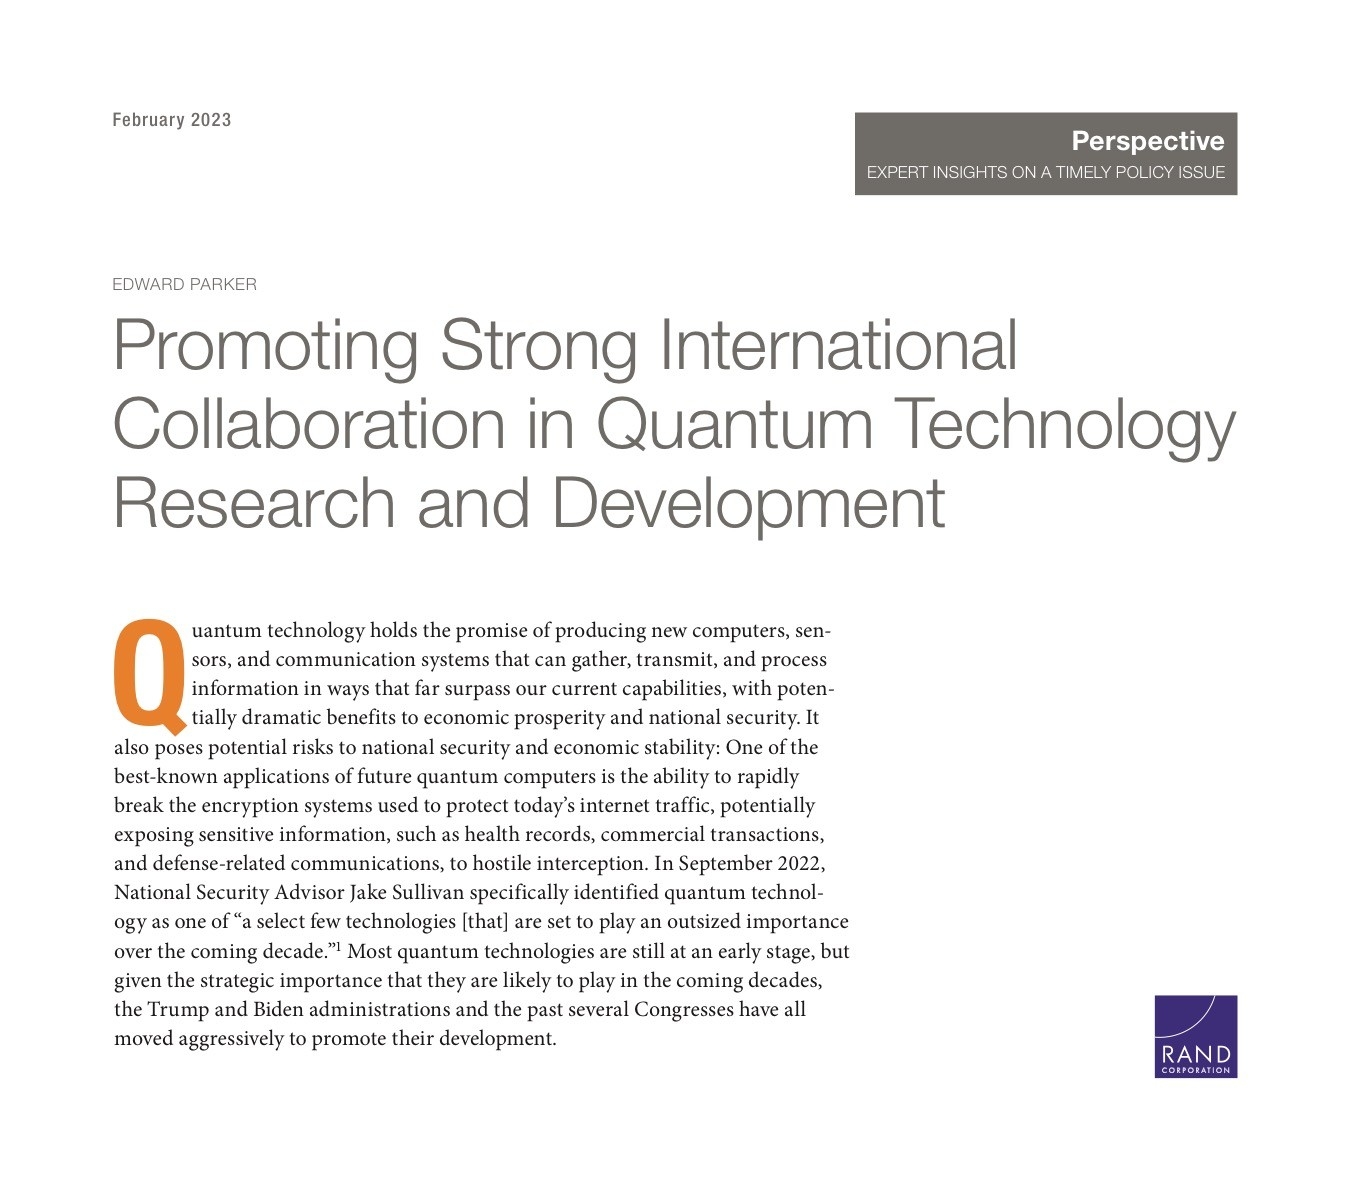 Promoting Strong International Collaboration in Quantum Technology Research and Development